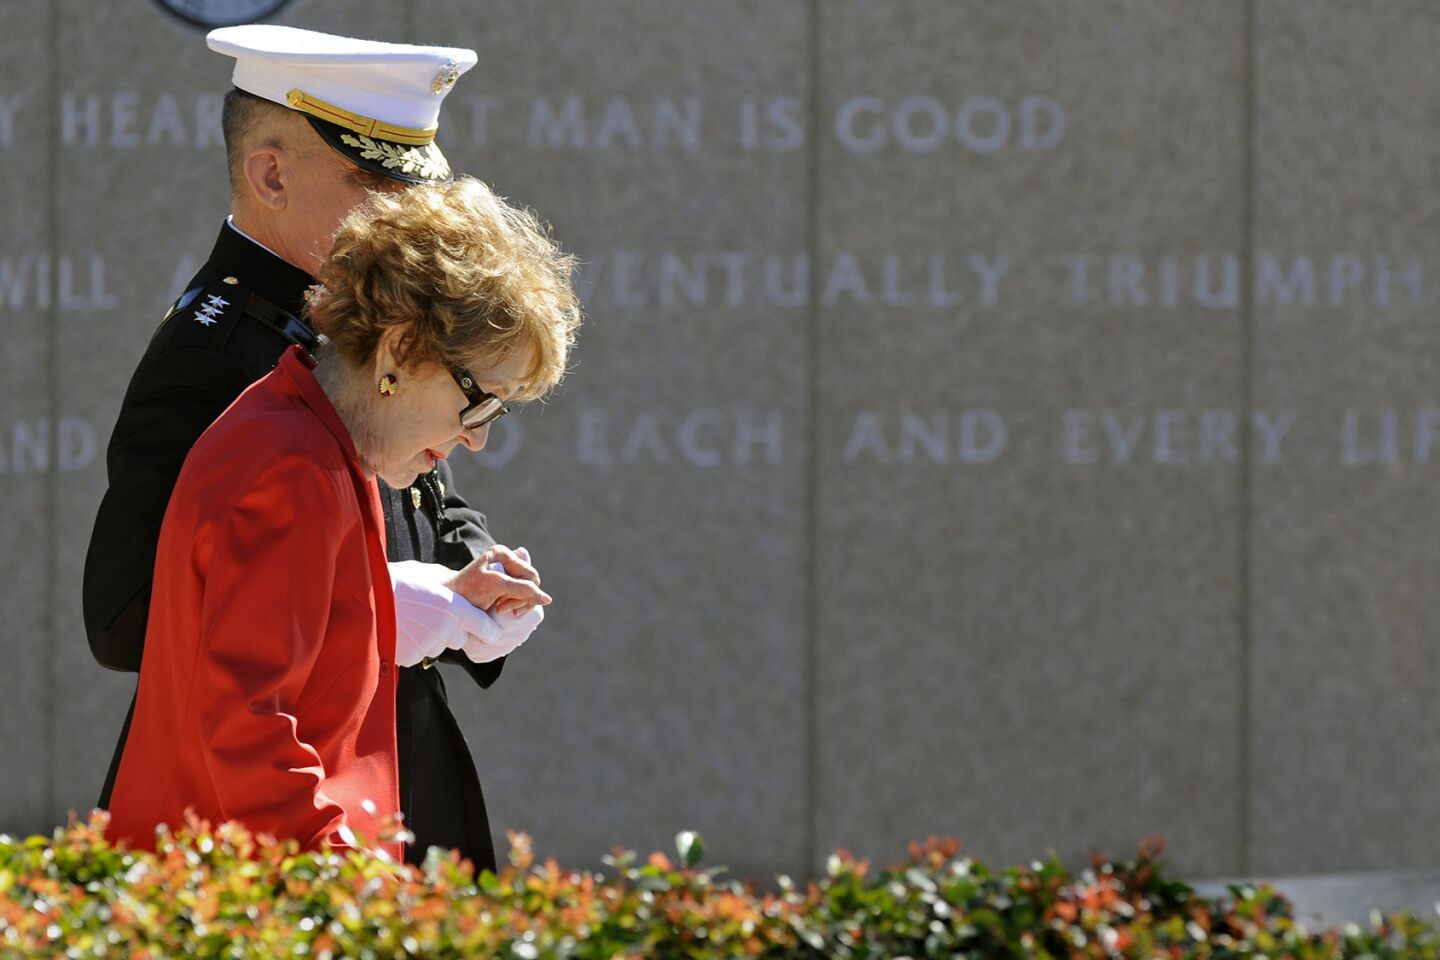 Nancy Reagan is helped by Marine Lt. Gen. George J. Flynn as she arrives for a wreath-laying ceremony at her husband's memorial at the Reagan Presidential Library in Simi Valley.